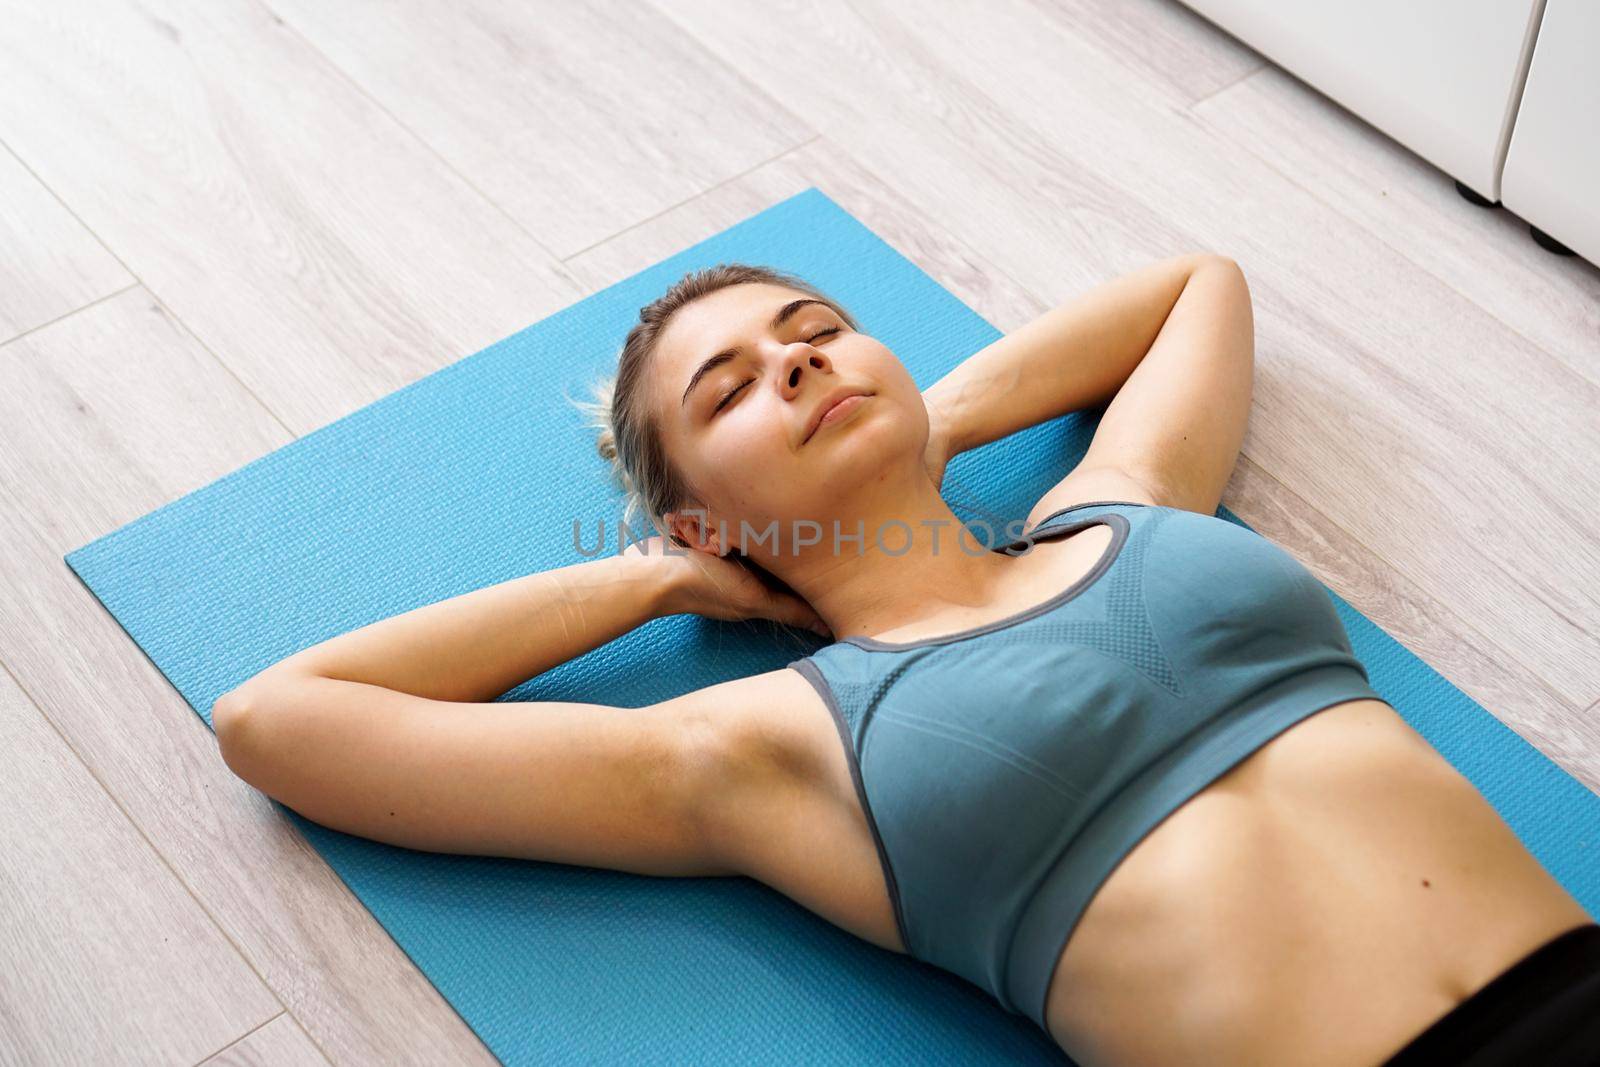 Top view of beautiful young woman lying on yoga mat after workout by natali_brill